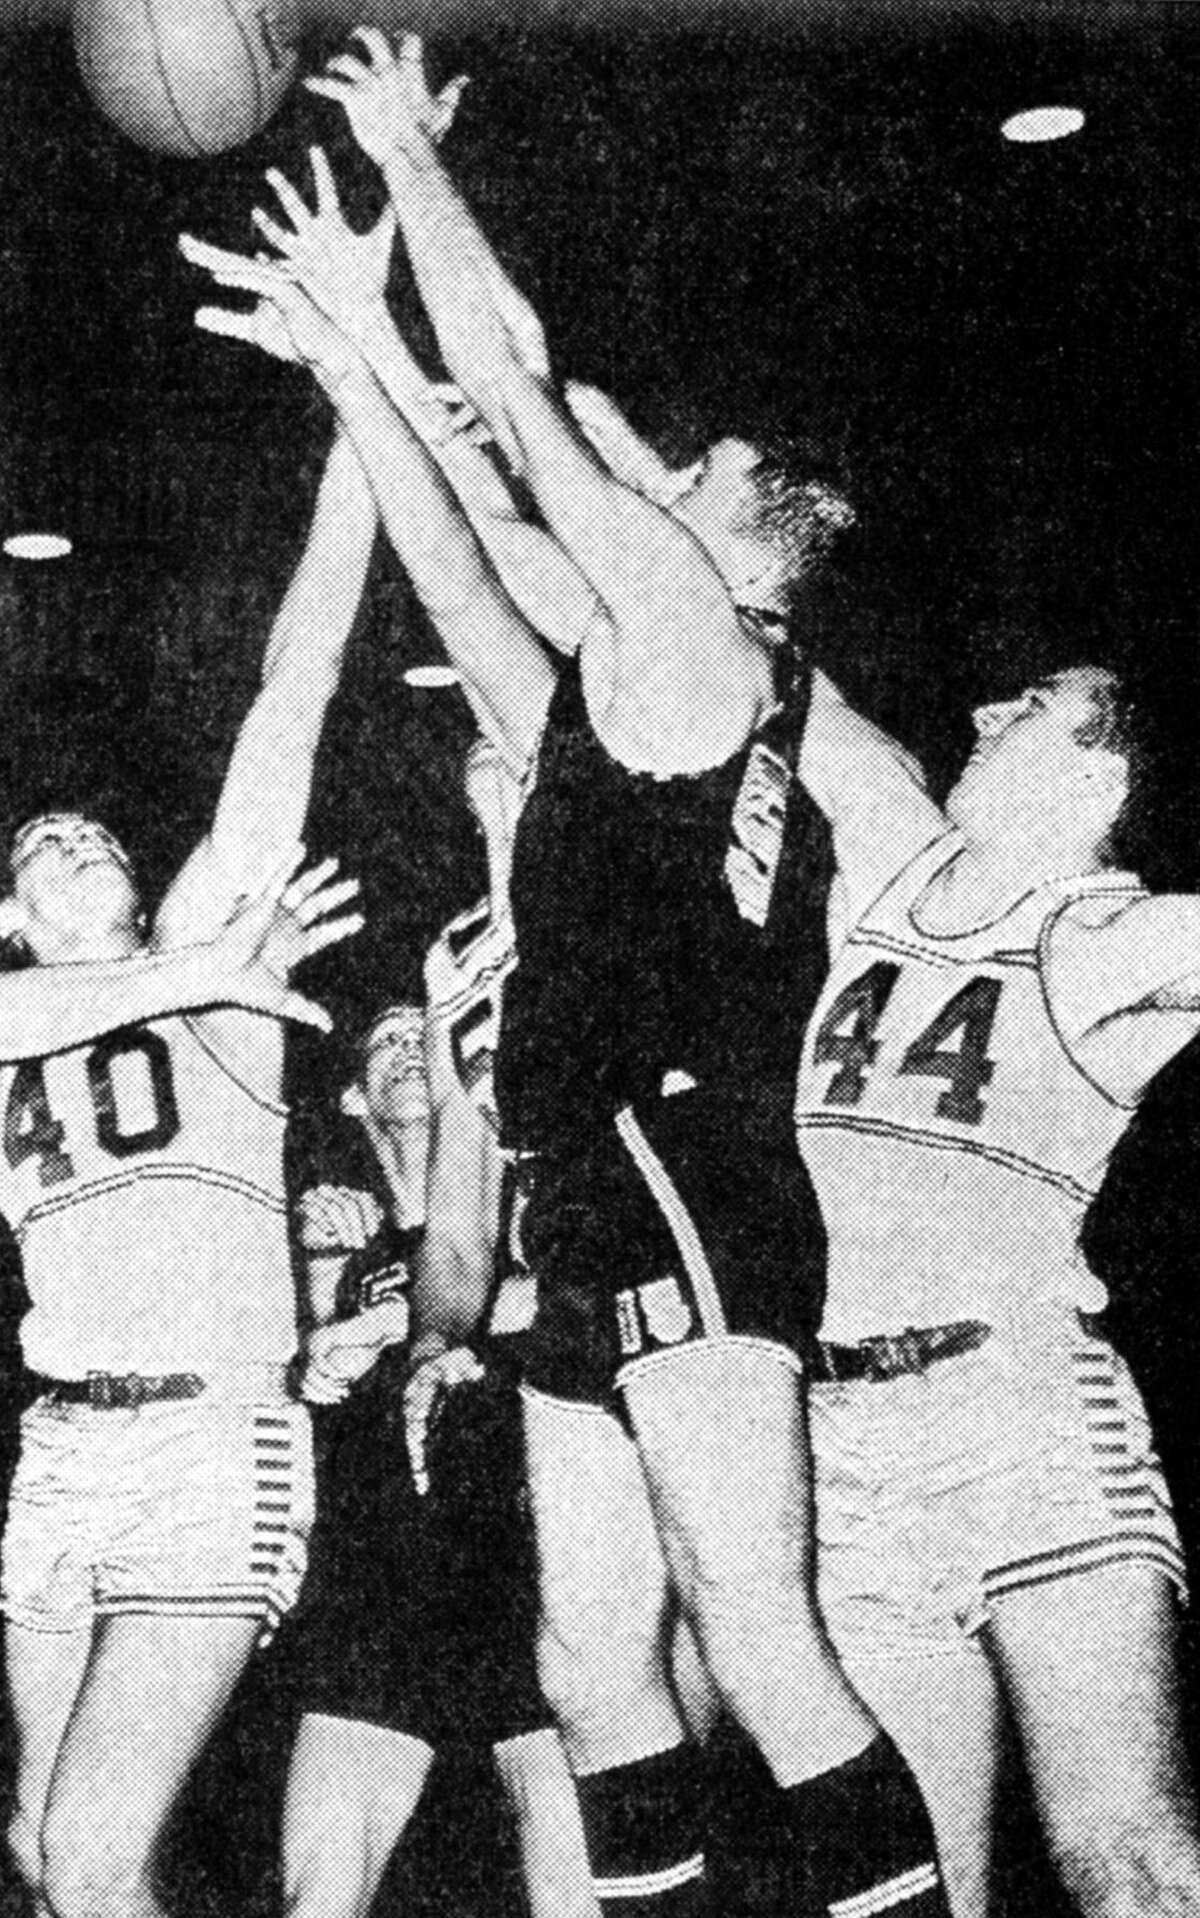 Manistee High School Chippewa players Dennis Lynch (No. 44) and Jim Wisniski (No. 40) go after a rebound in Friday night's game with the Alma Panthers which Manistee won by a score of 64-35. The photo was published in the News Advocate on Feb. 17, 1962.